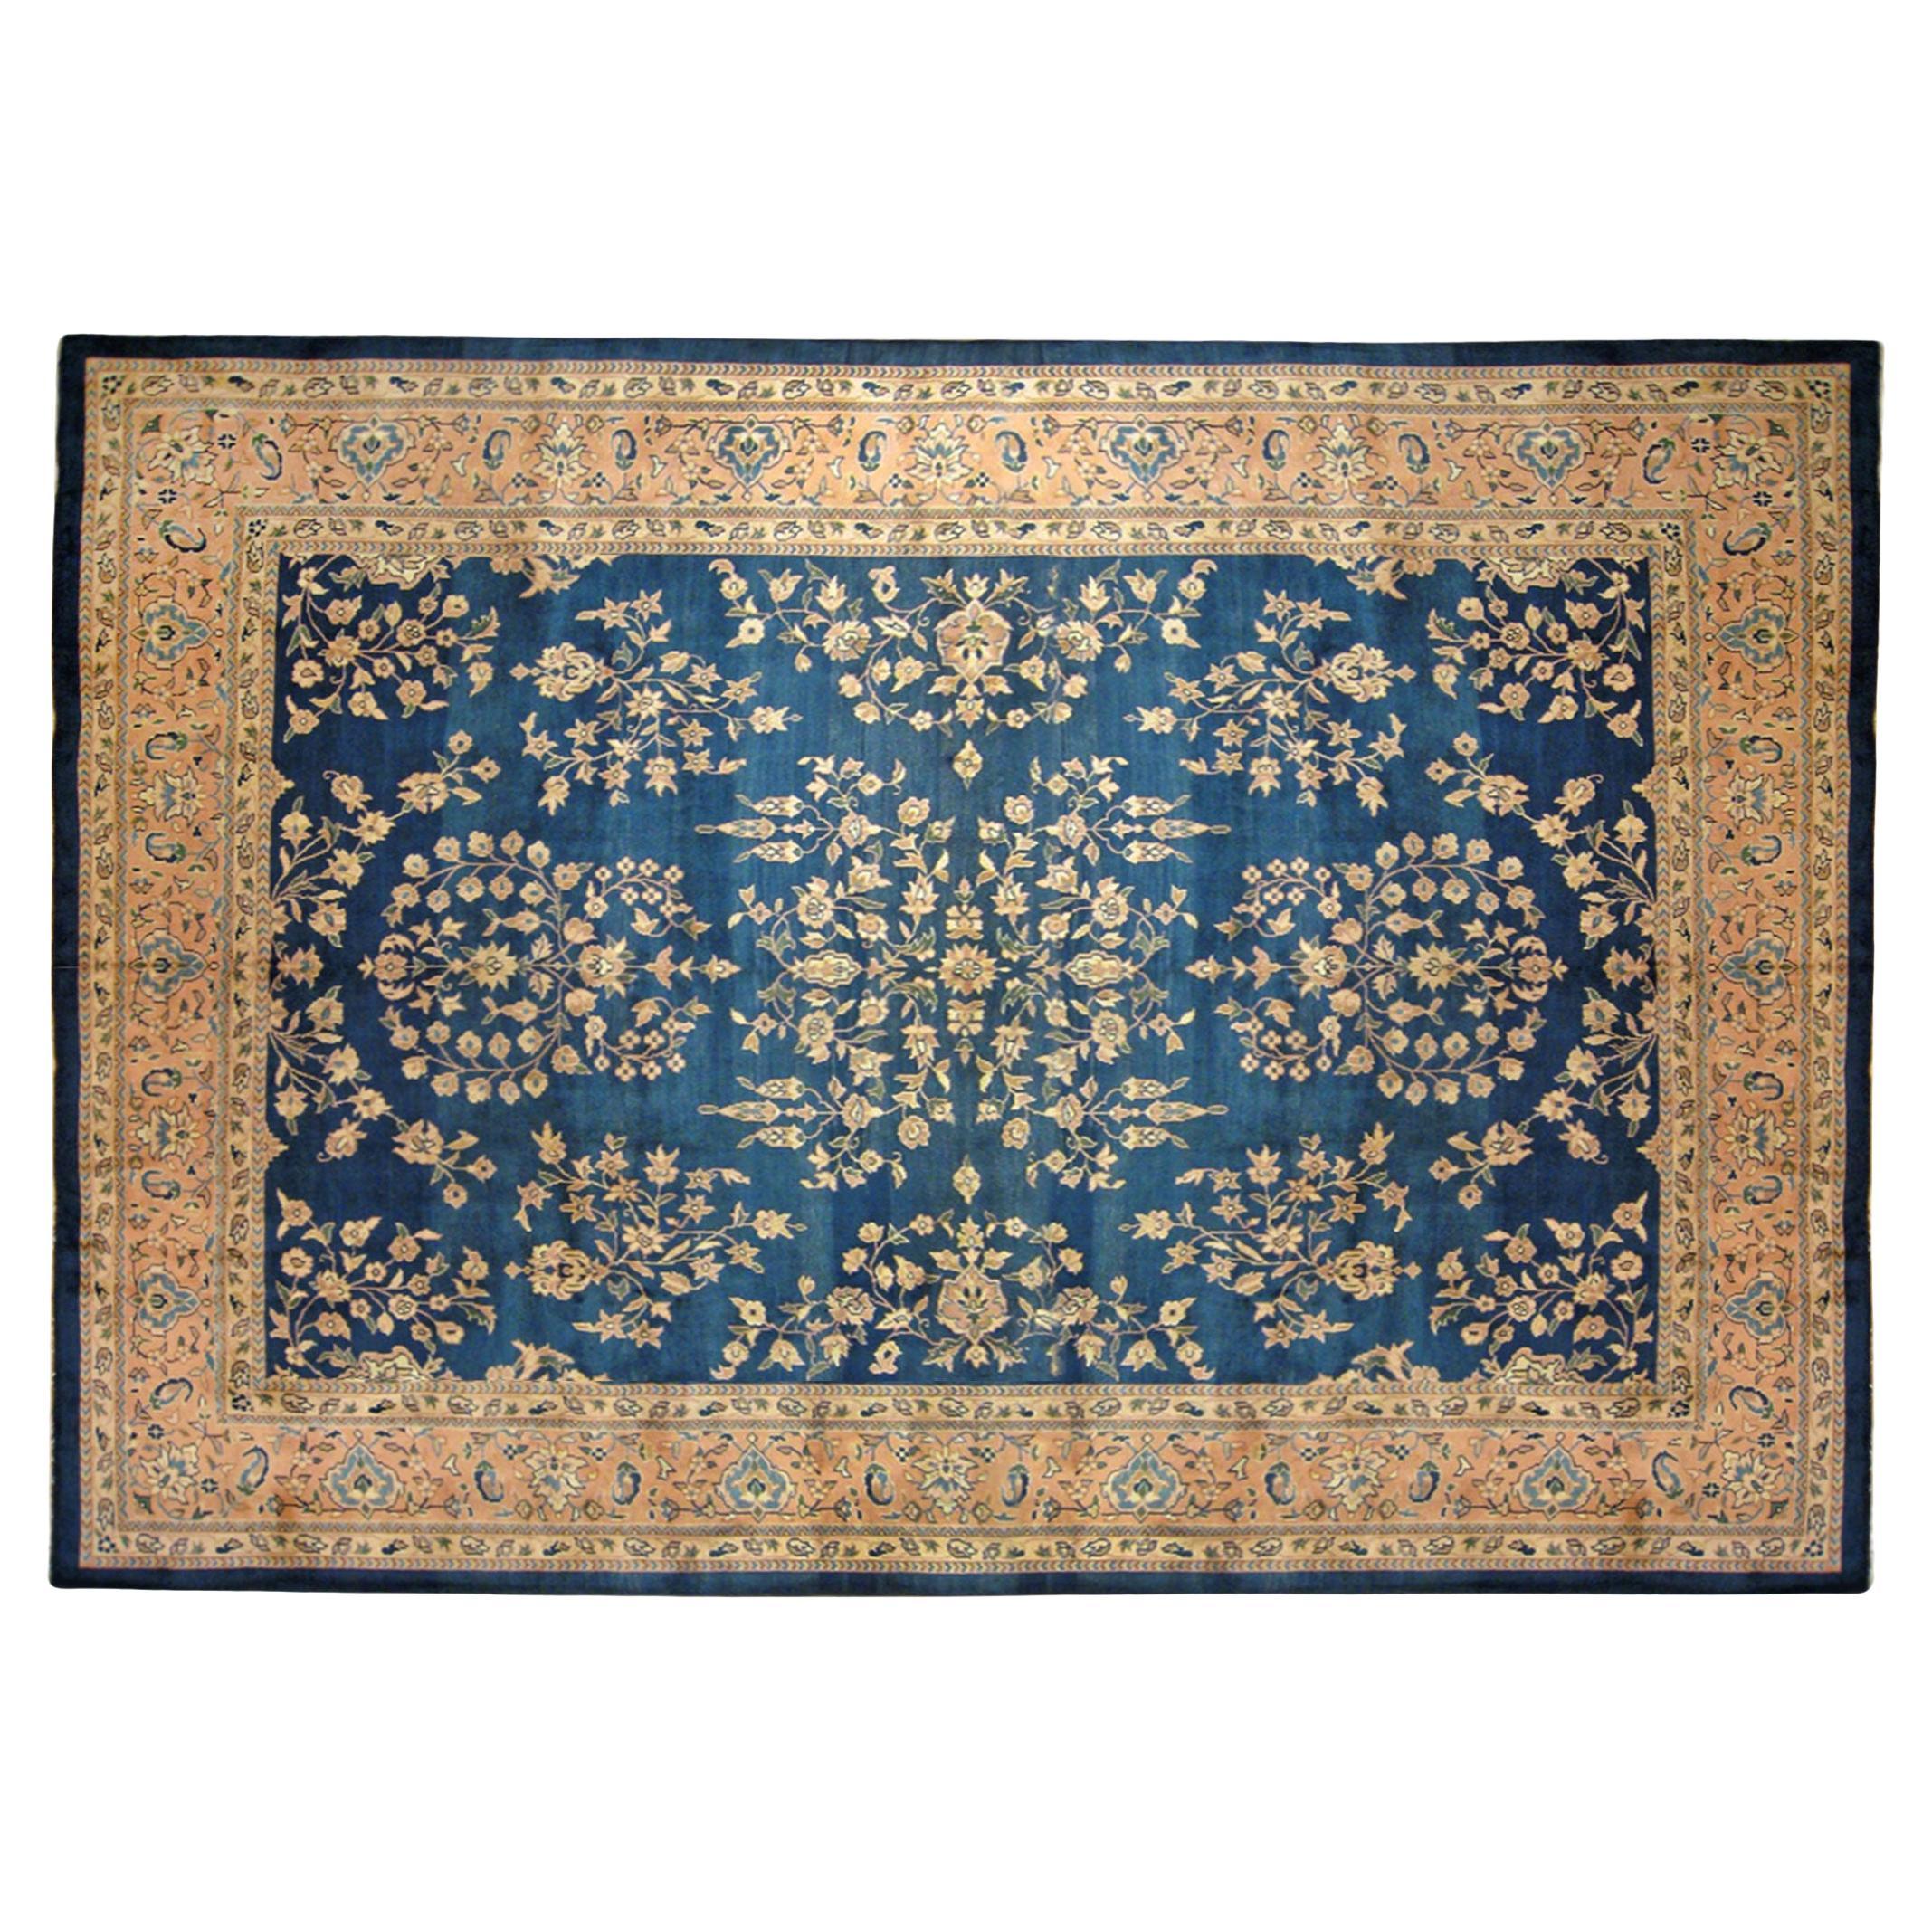 Antique Indian Oriental Rug, in Room Size, with Repeating Flower Elements For Sale